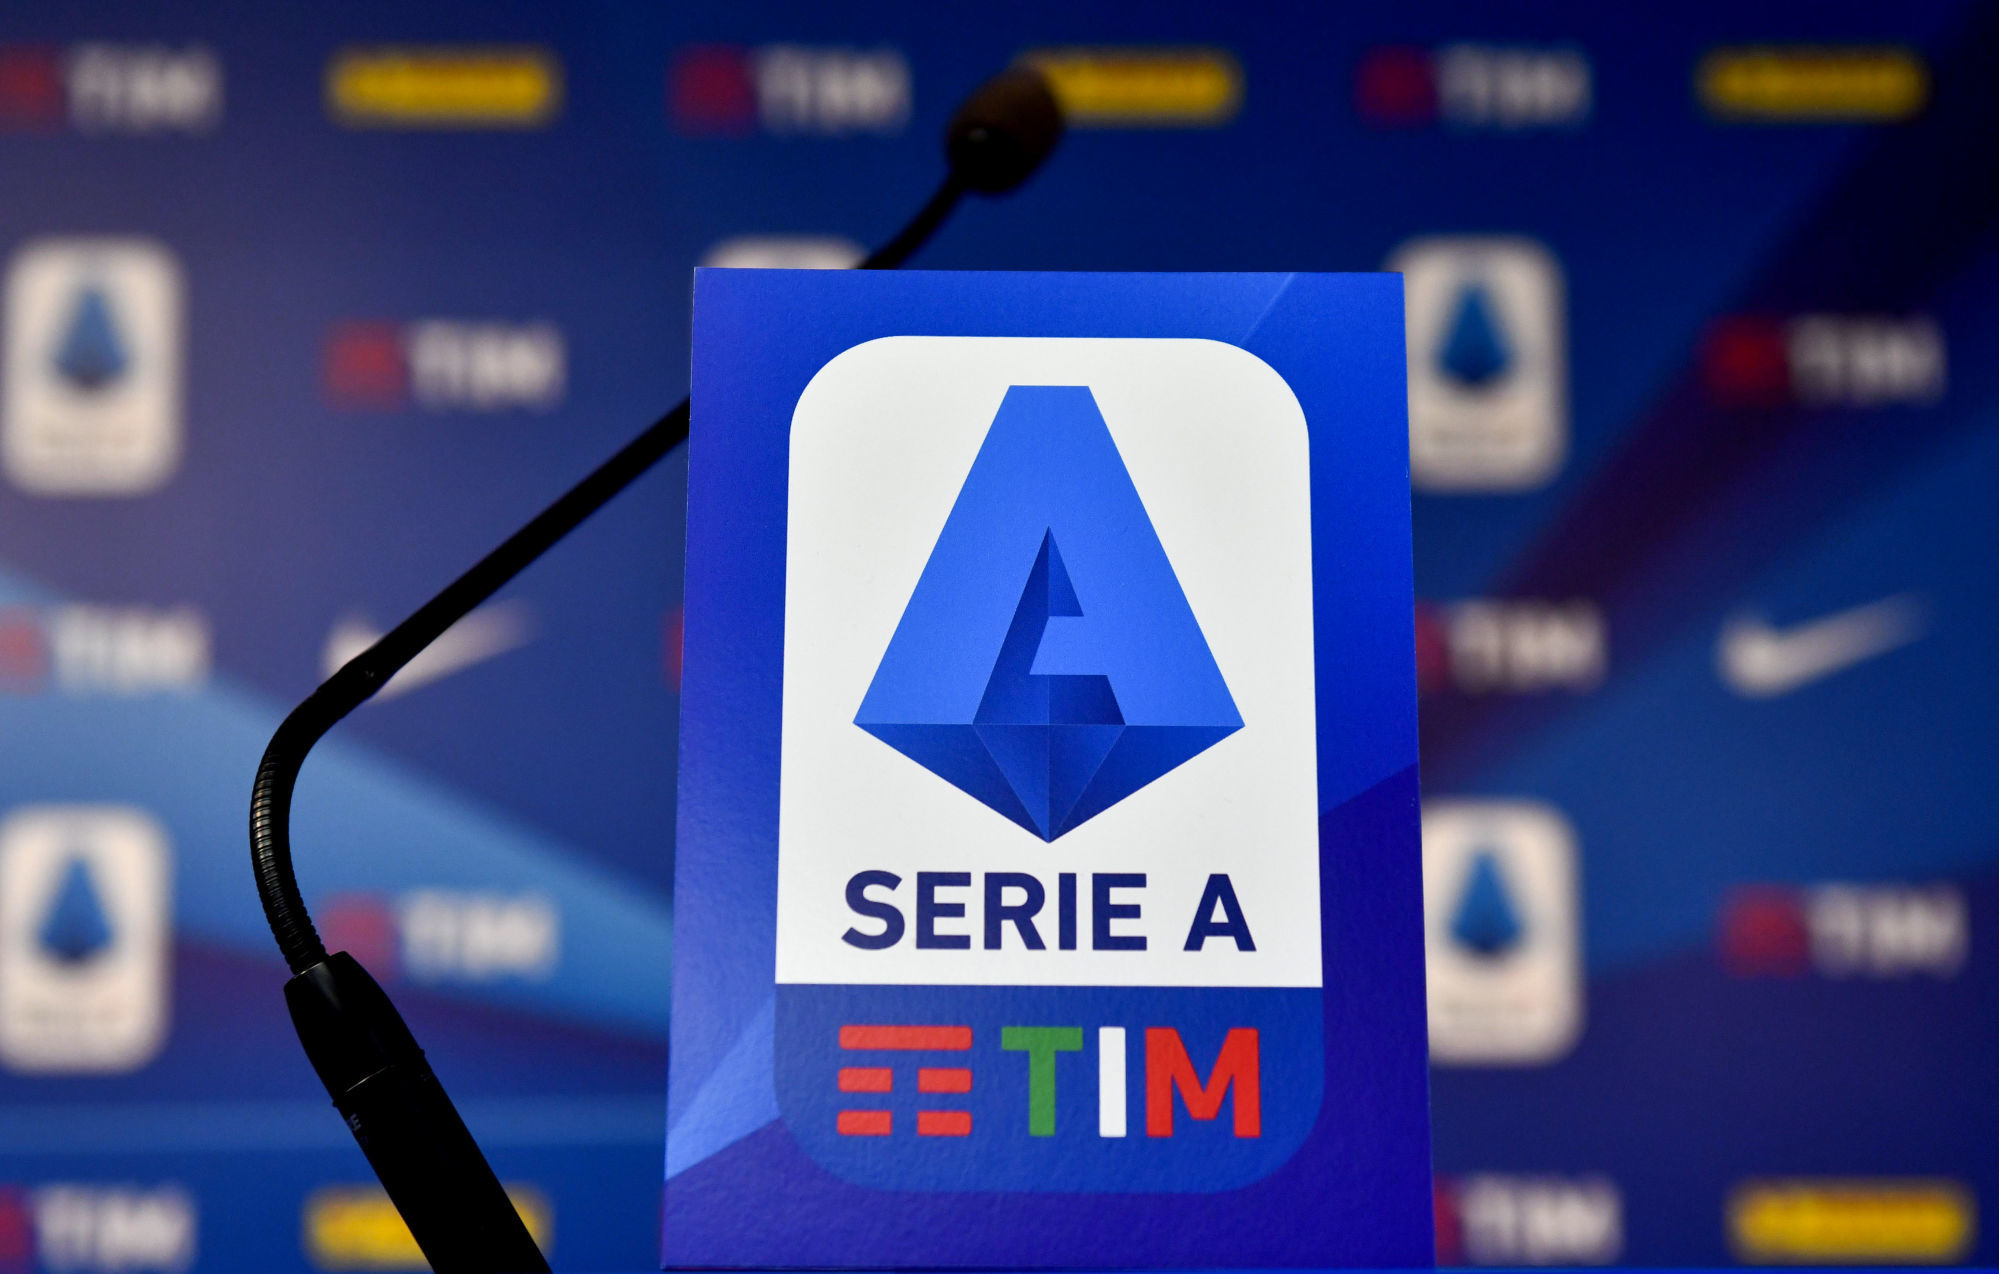 Milano 08/07/2019
Presentation of the new logo of the Serie A.
Photo : Ipp / Icon Sport